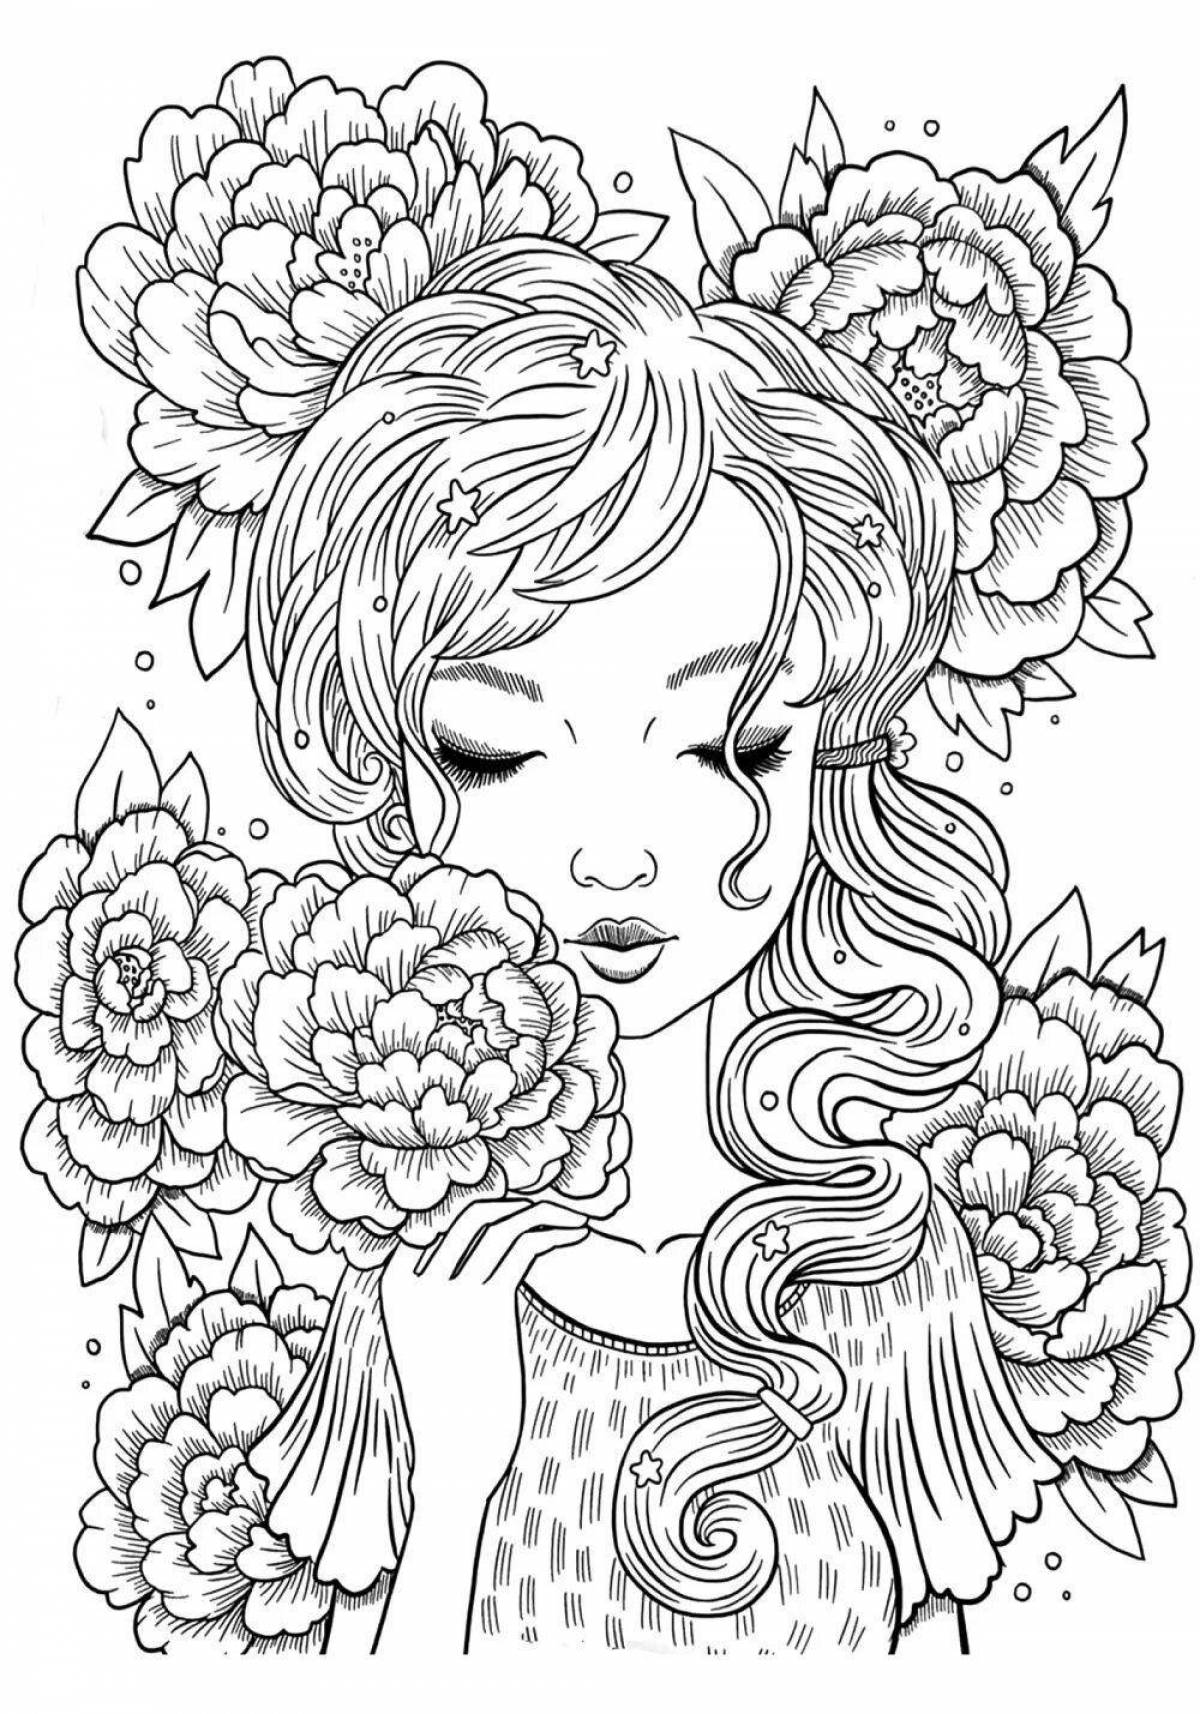 Creative 19 year old coloring book for girls